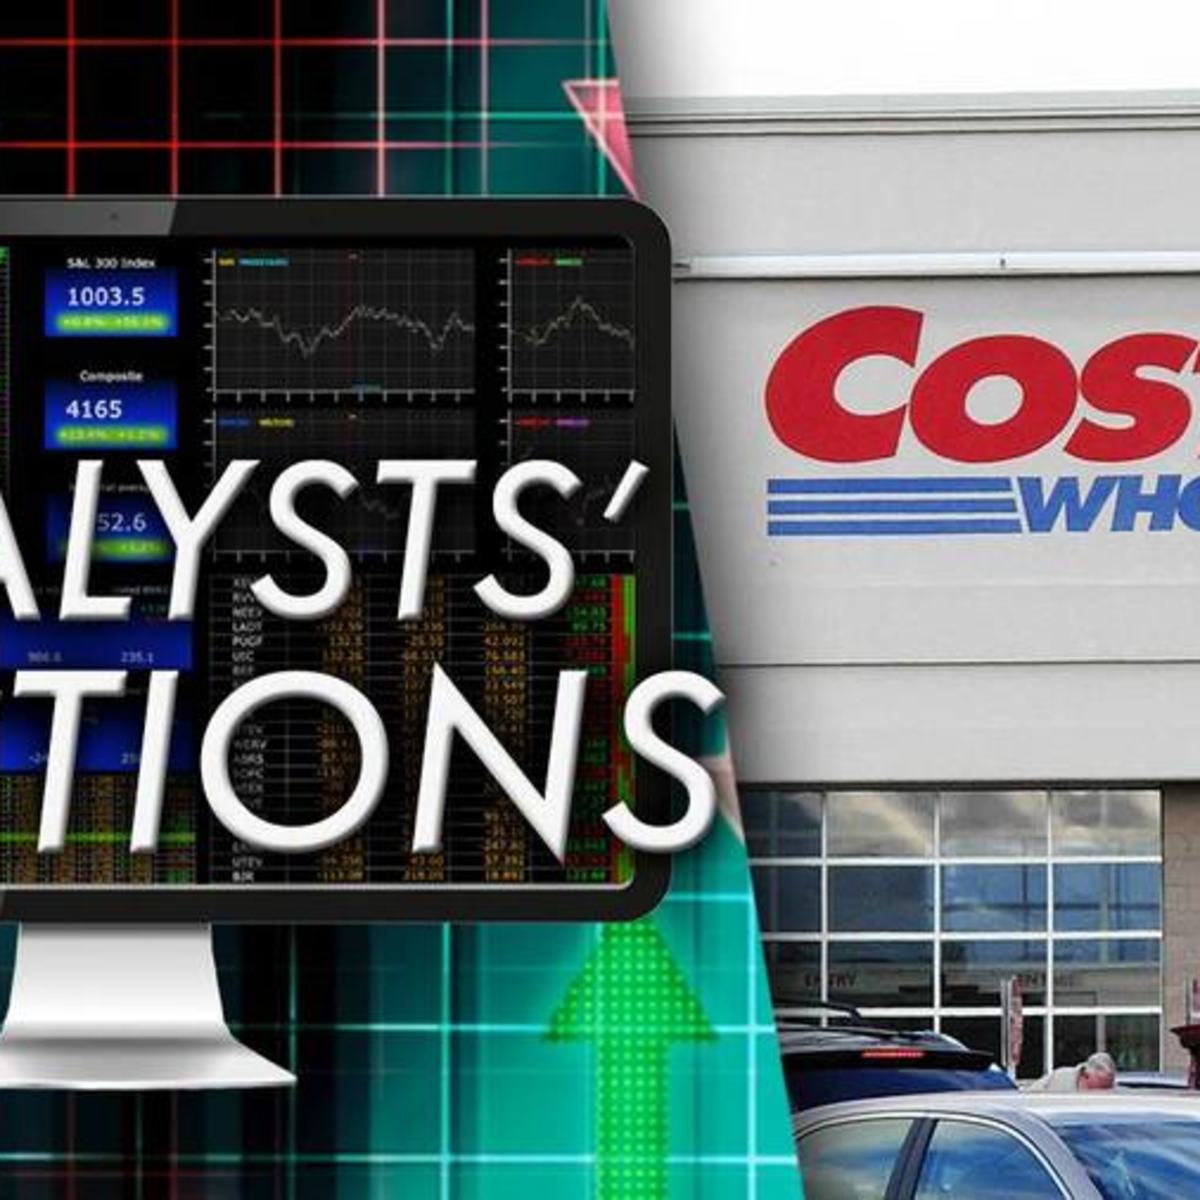 PayPal, Costco Get Positive Reviews 